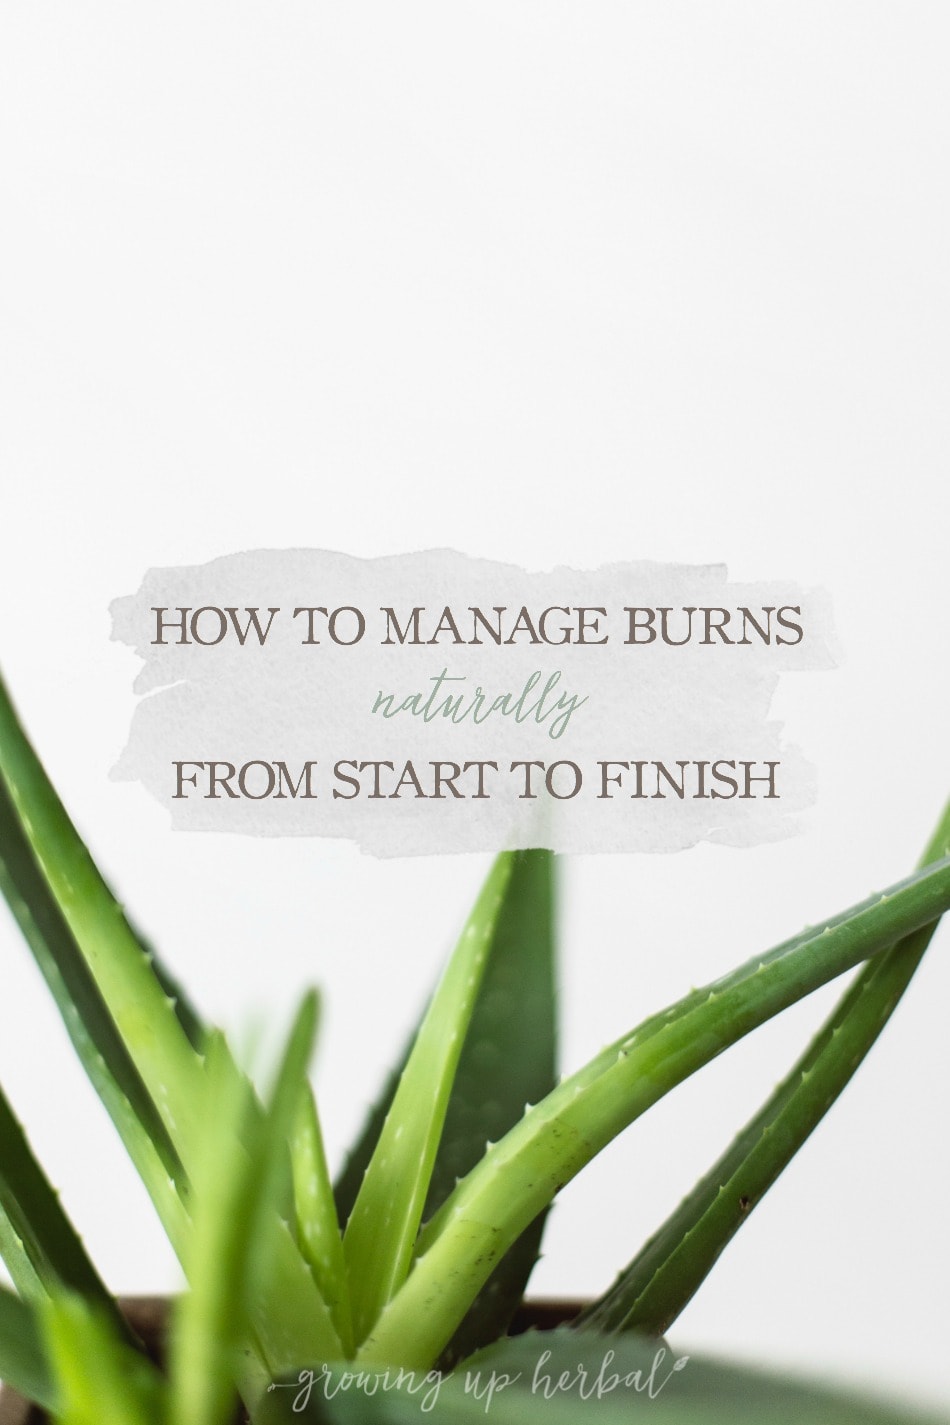 How To Manage Burns Naturally From Start To Finish | Growing Up Herbal | Learn some basic lifestyle and herbal suggestions you can use manage burns naturally the next time you experience a burn.